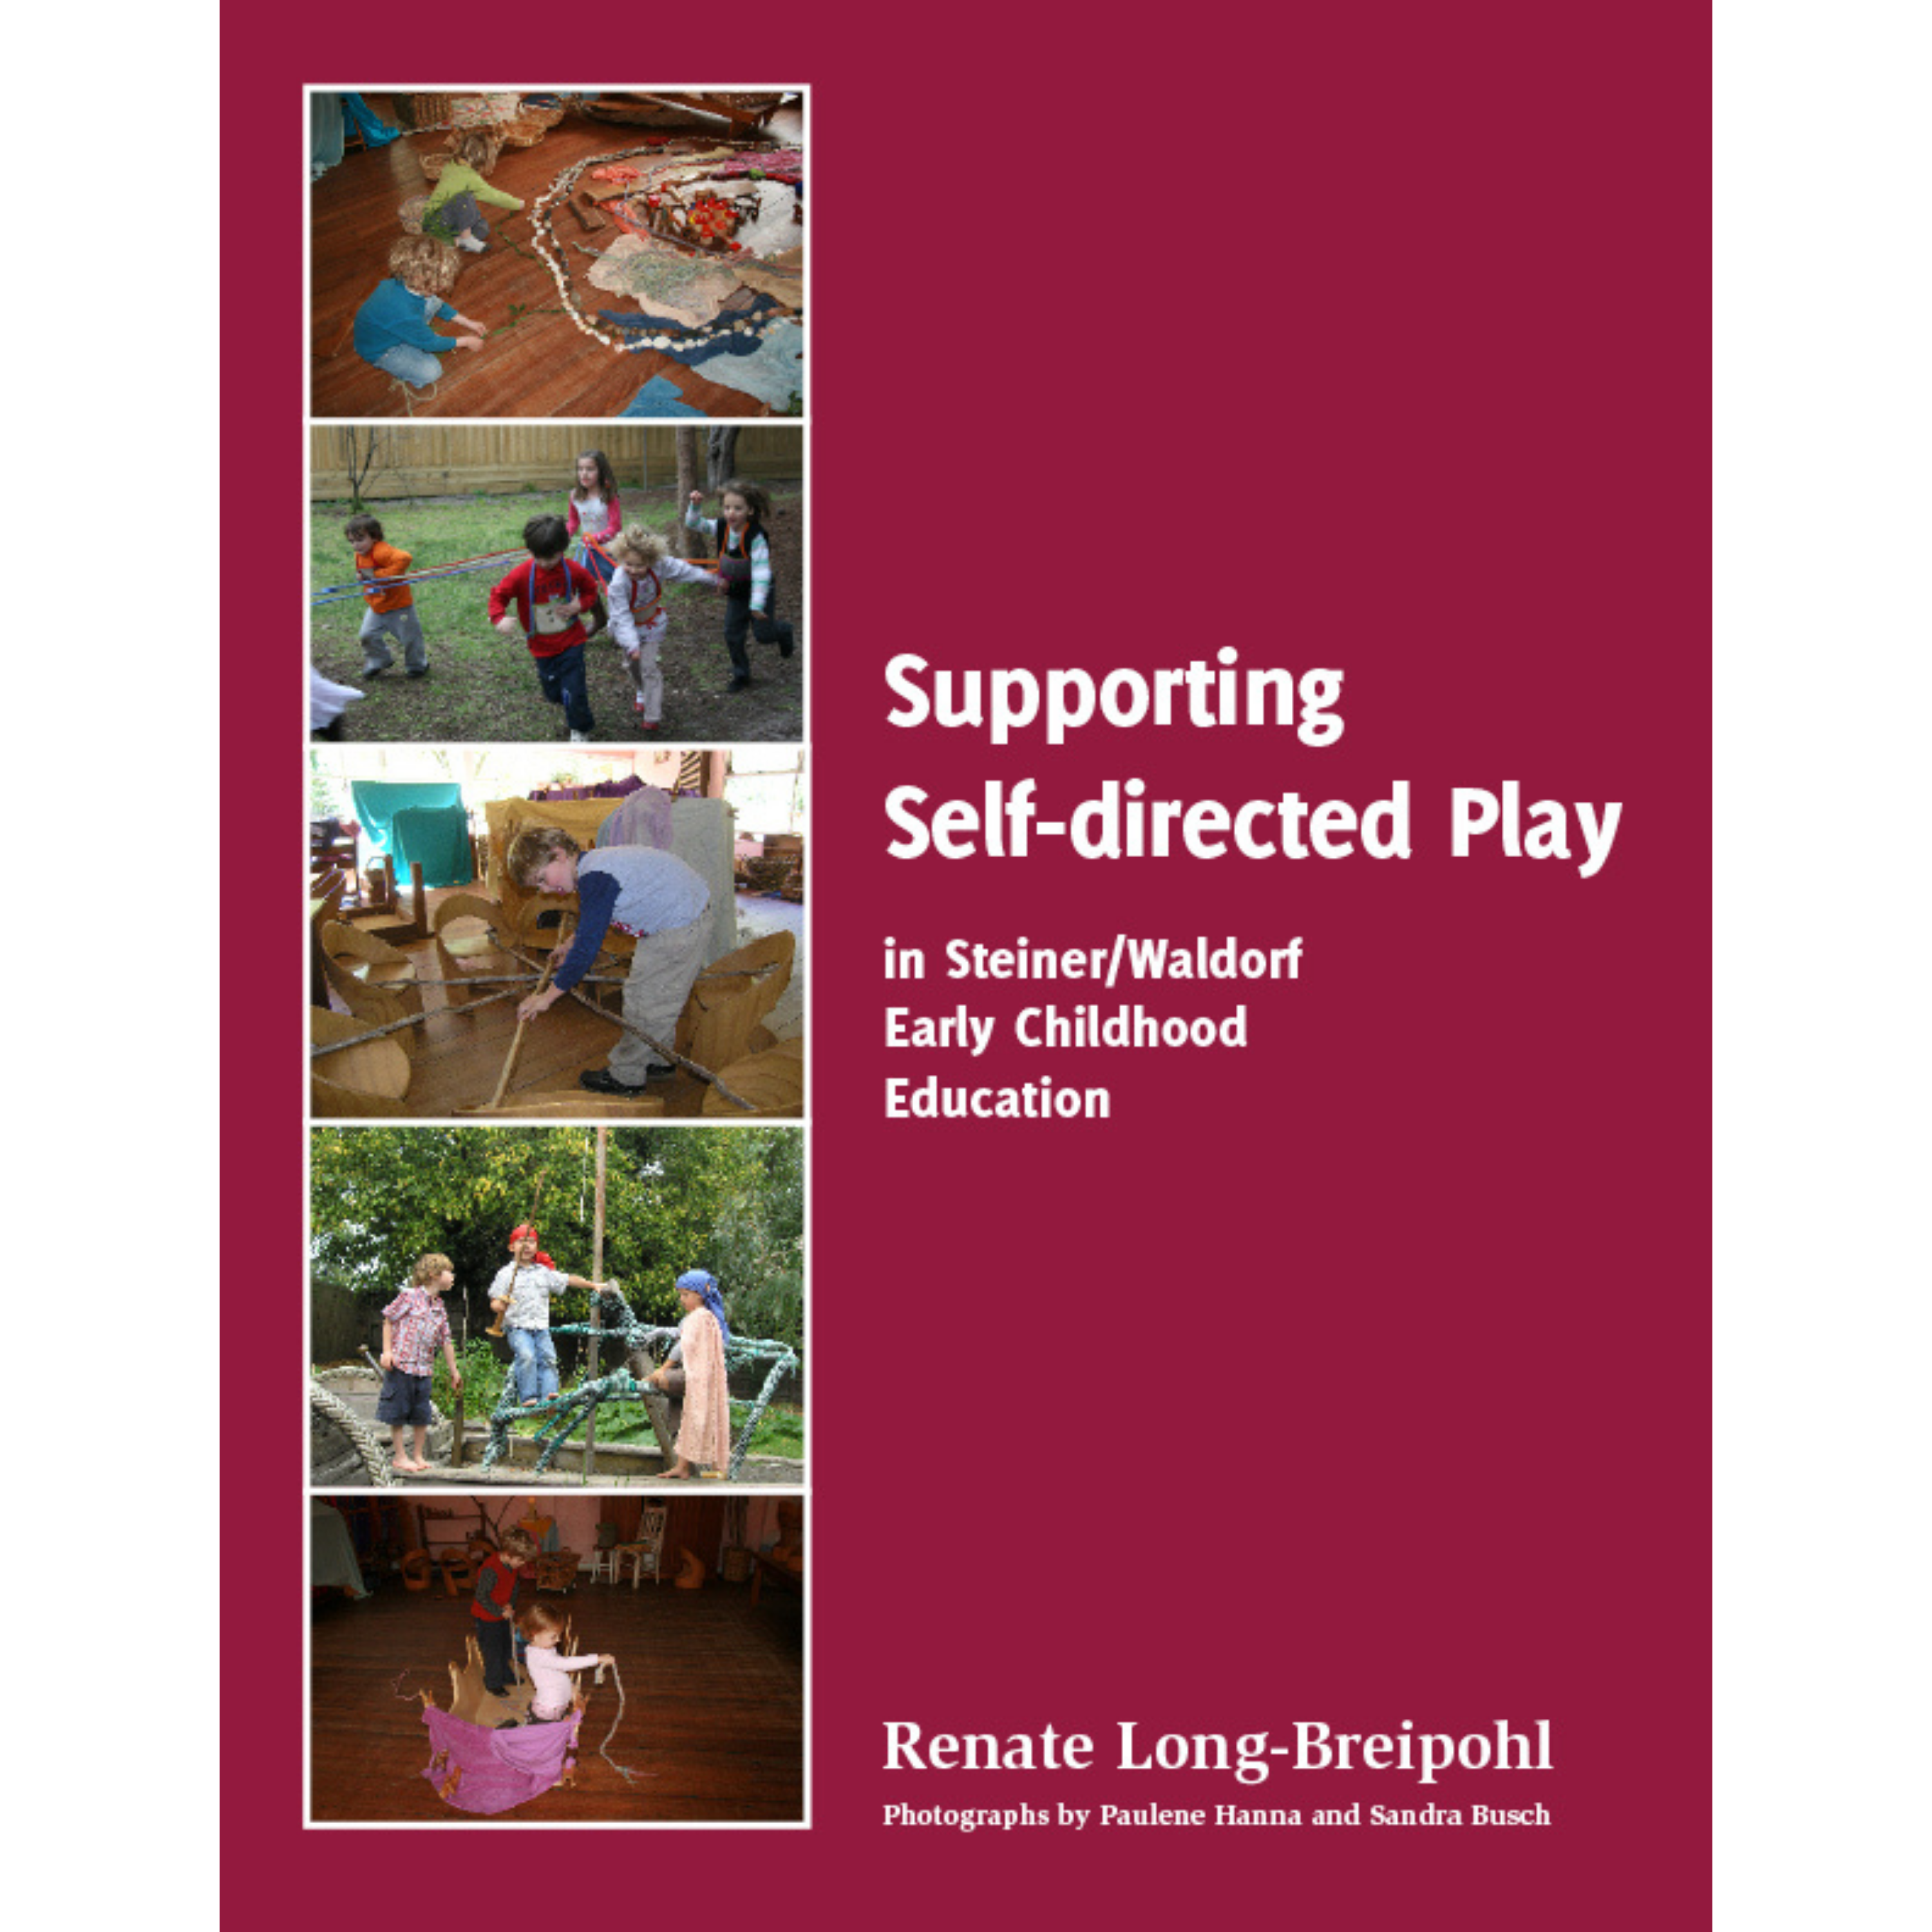 Supporting Self-directed Play in Steiner/Waldorf Early Childhood Education